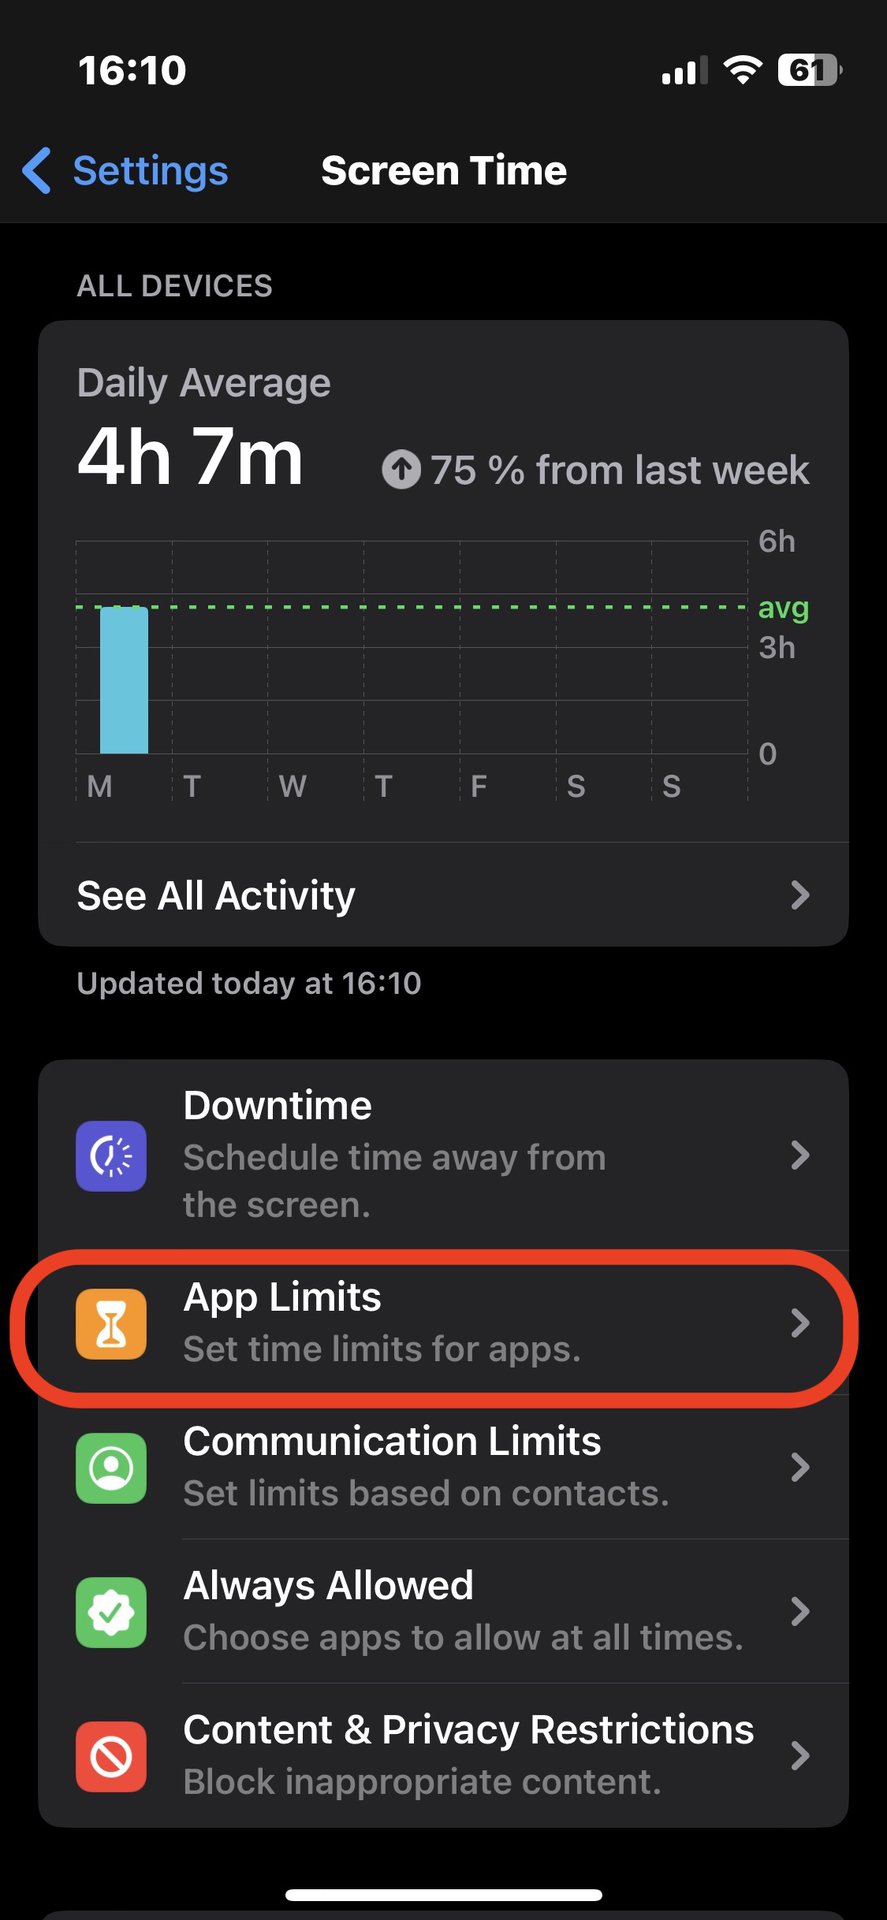 iphone screen time app limits option